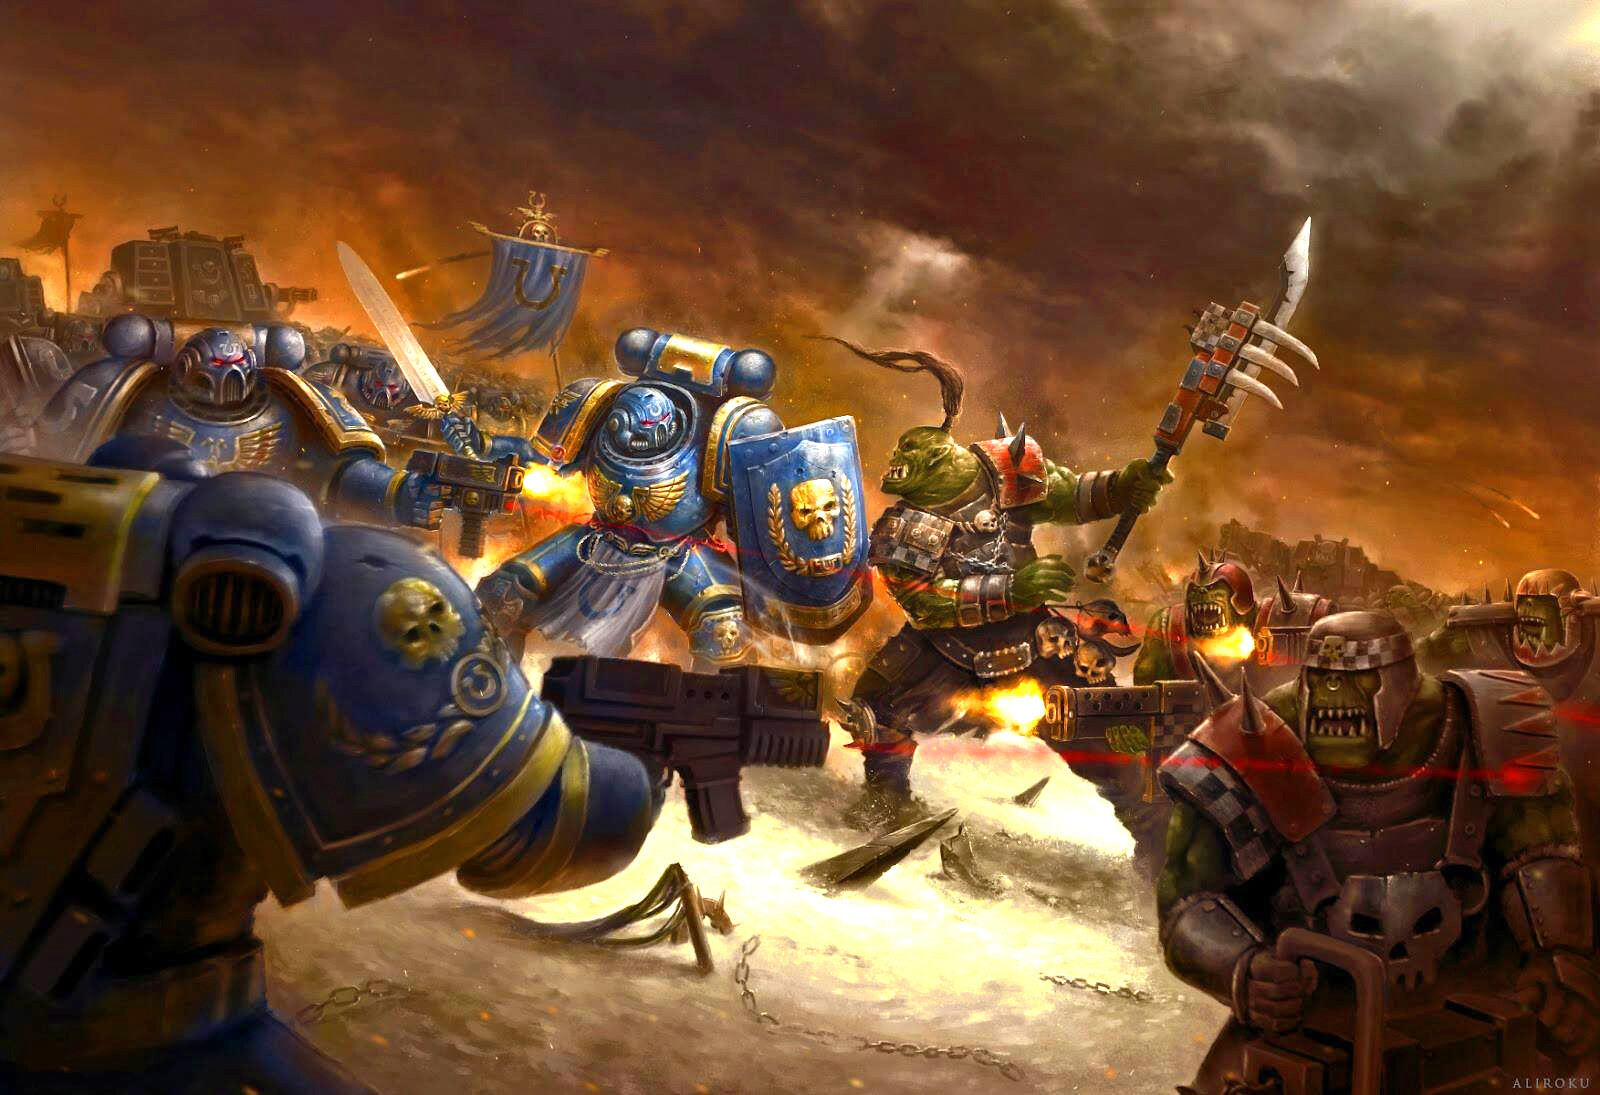 Spacemarine VS Orc - The Clash - Warhammer40k.